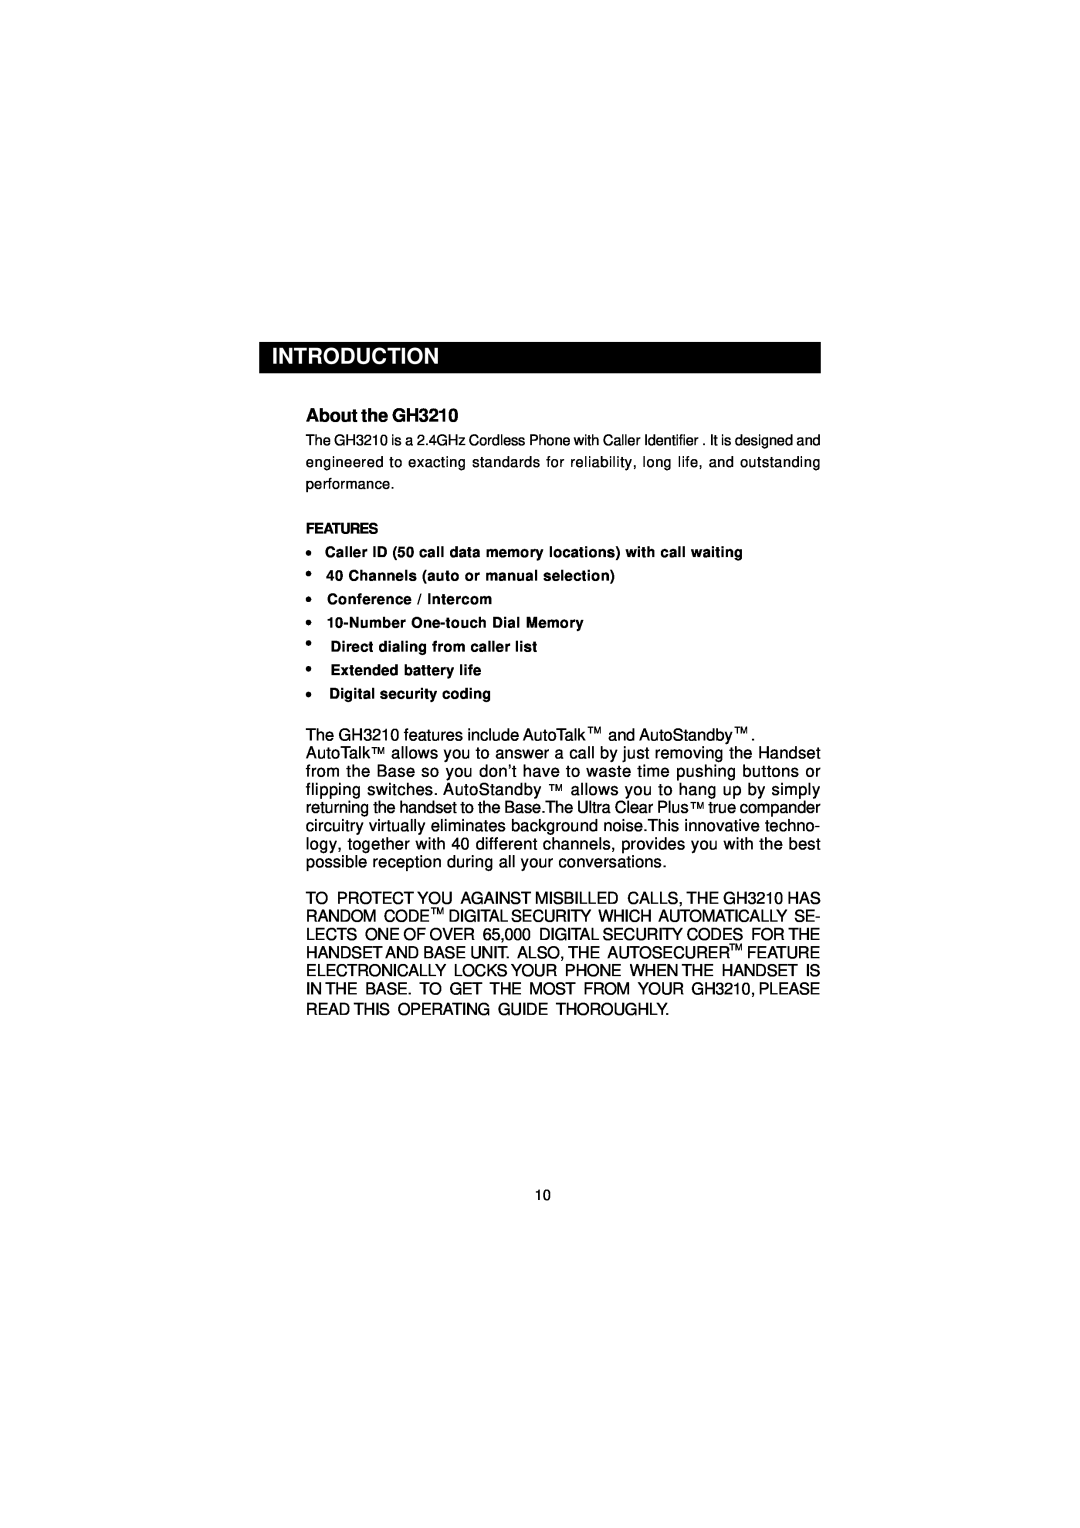 Southwestern Bell owner manual Introduction, About the GH3210 